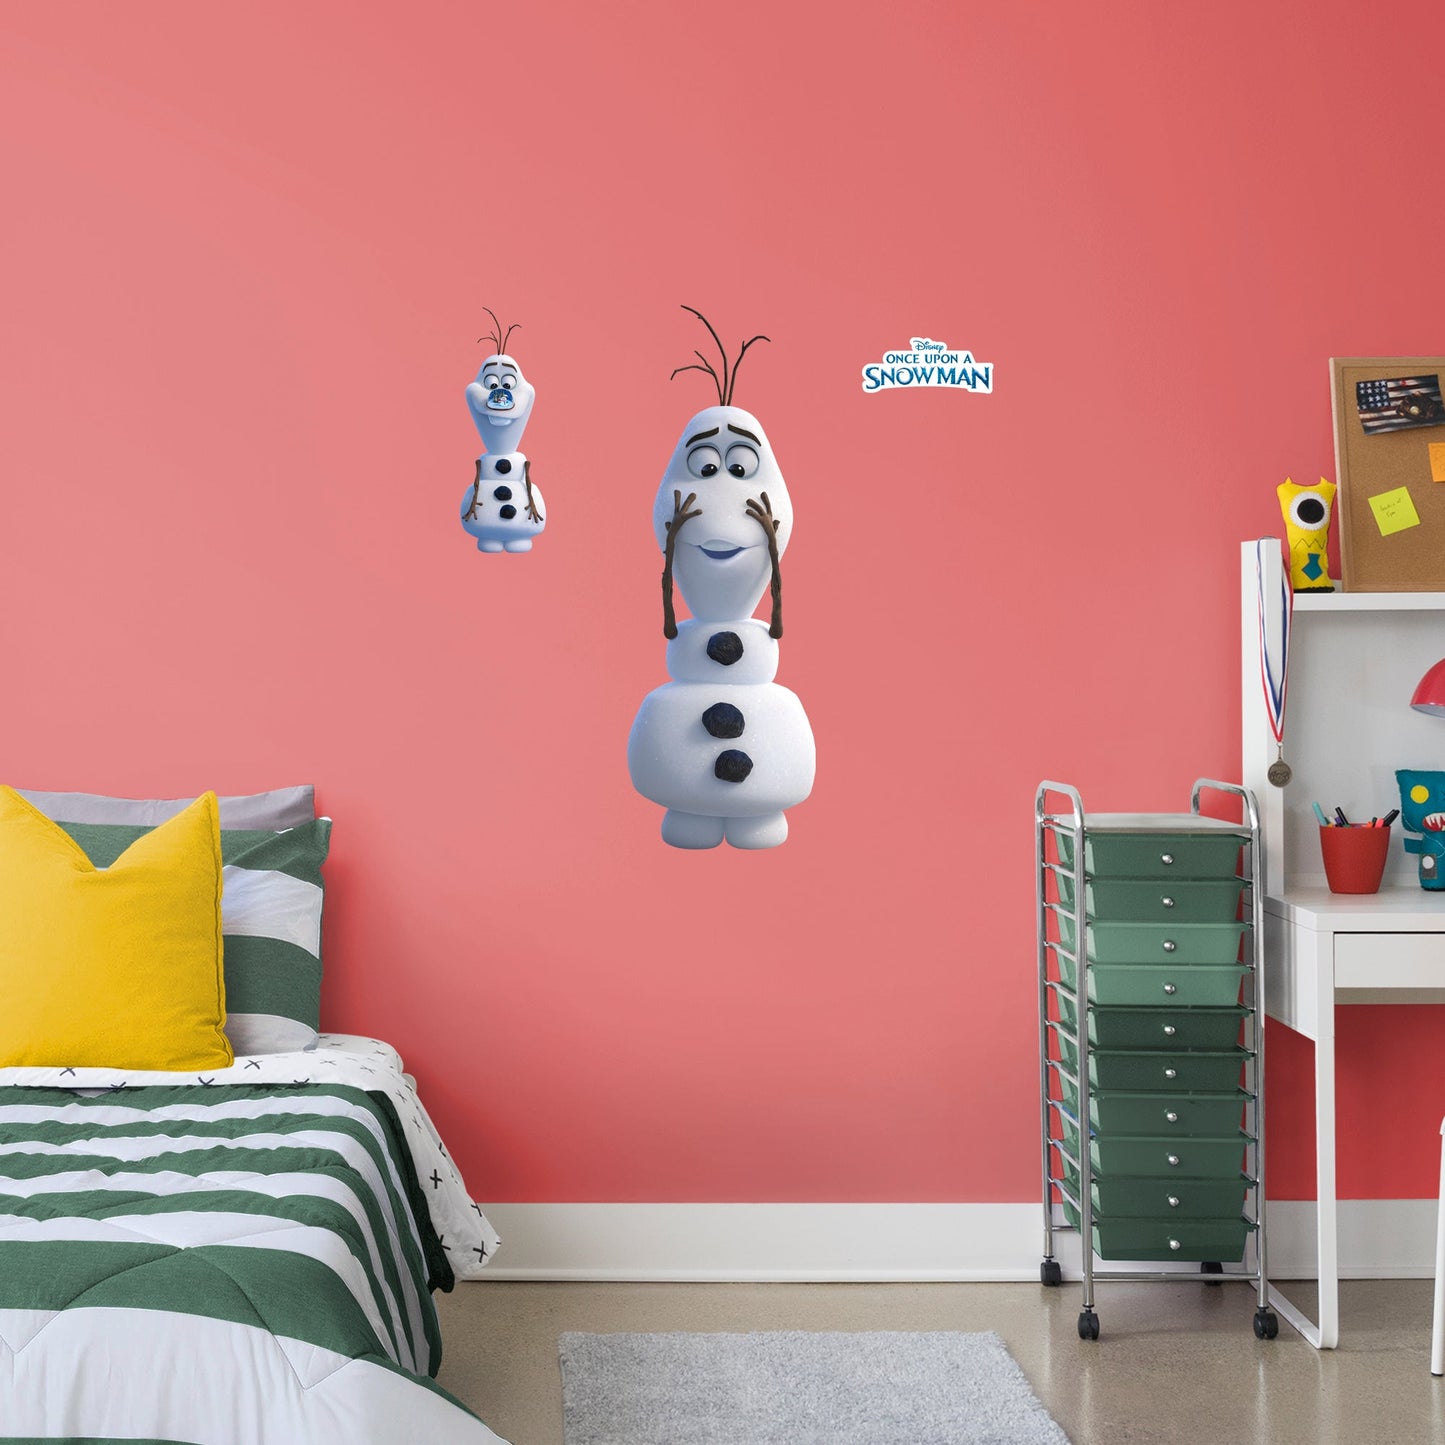 Olaf: Nose - Once Upon A Snowman - Officially Licensed Disney Removable Wall Decal